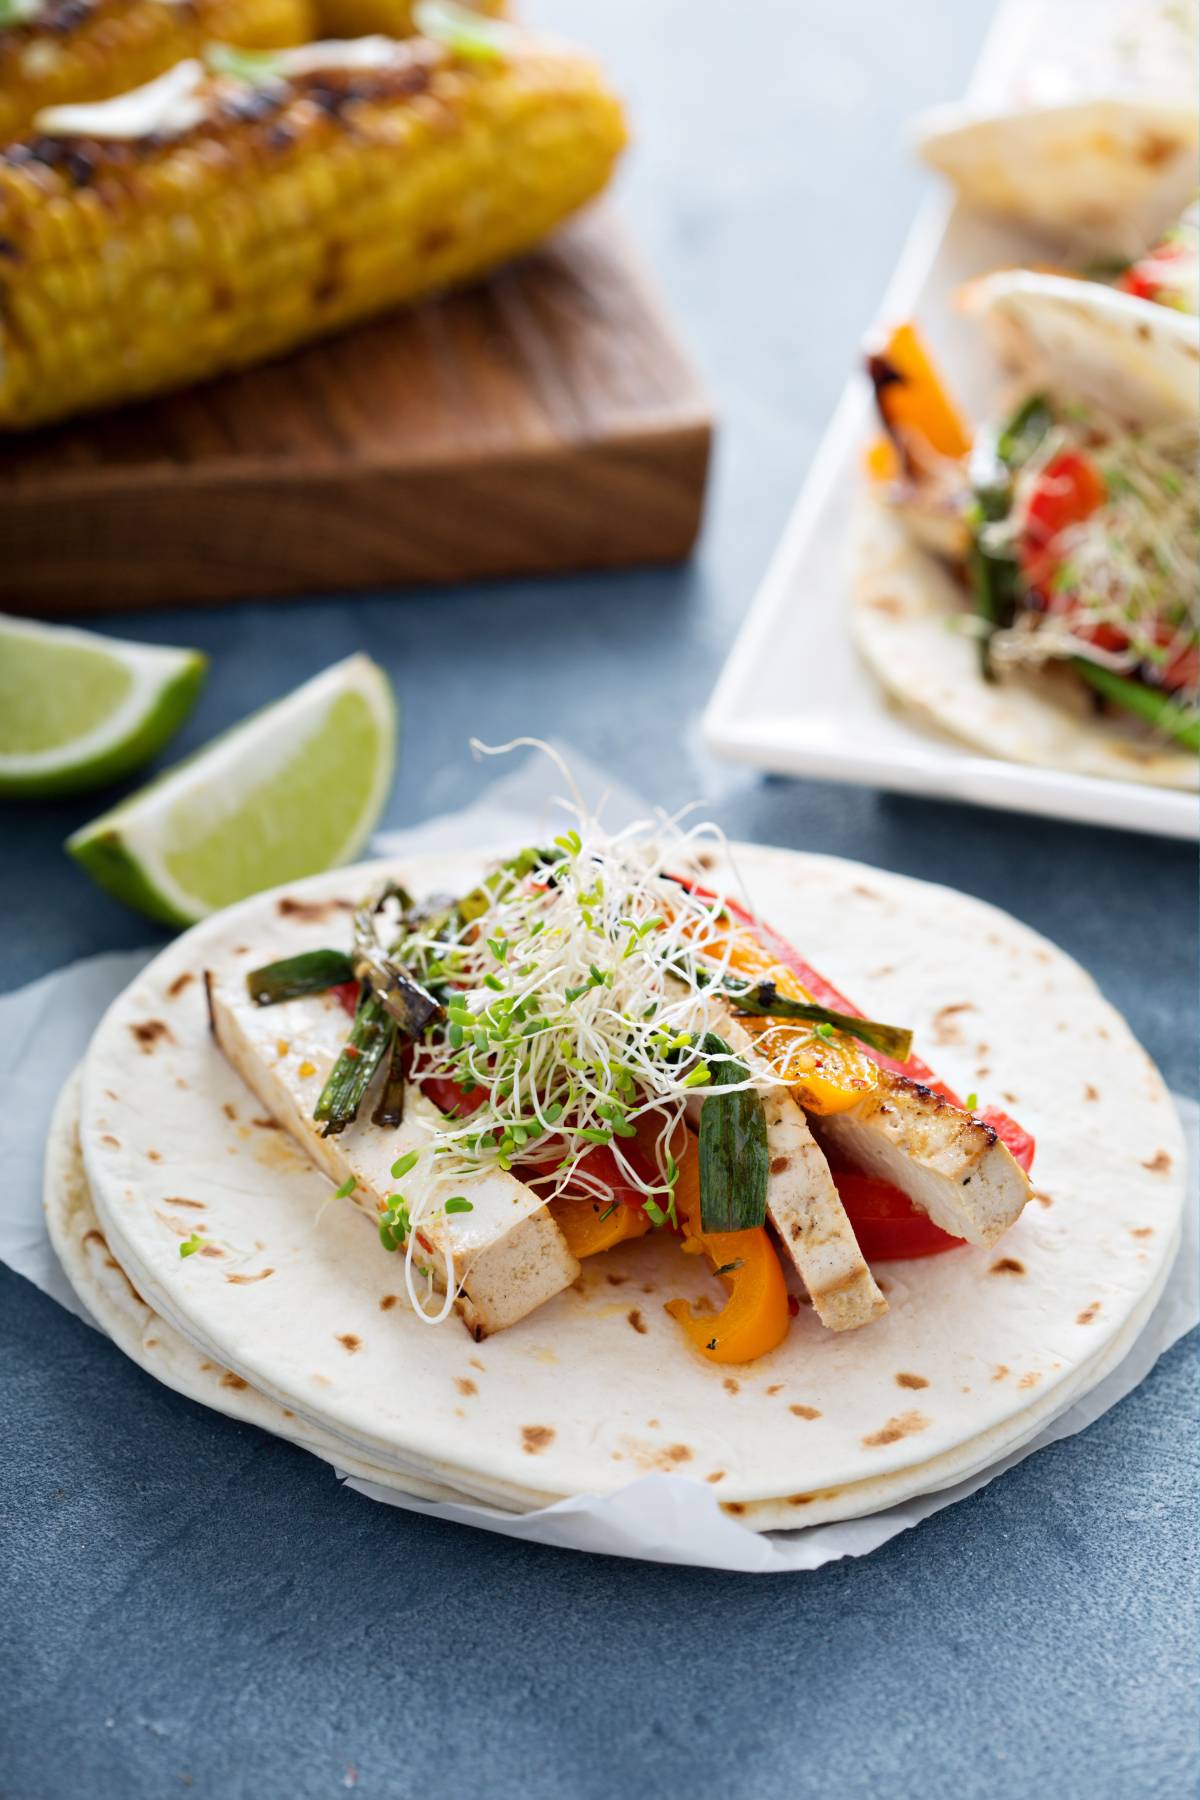 Easy Taco Recipes For Your Next Event: 15 Quick + Delicious Ideas